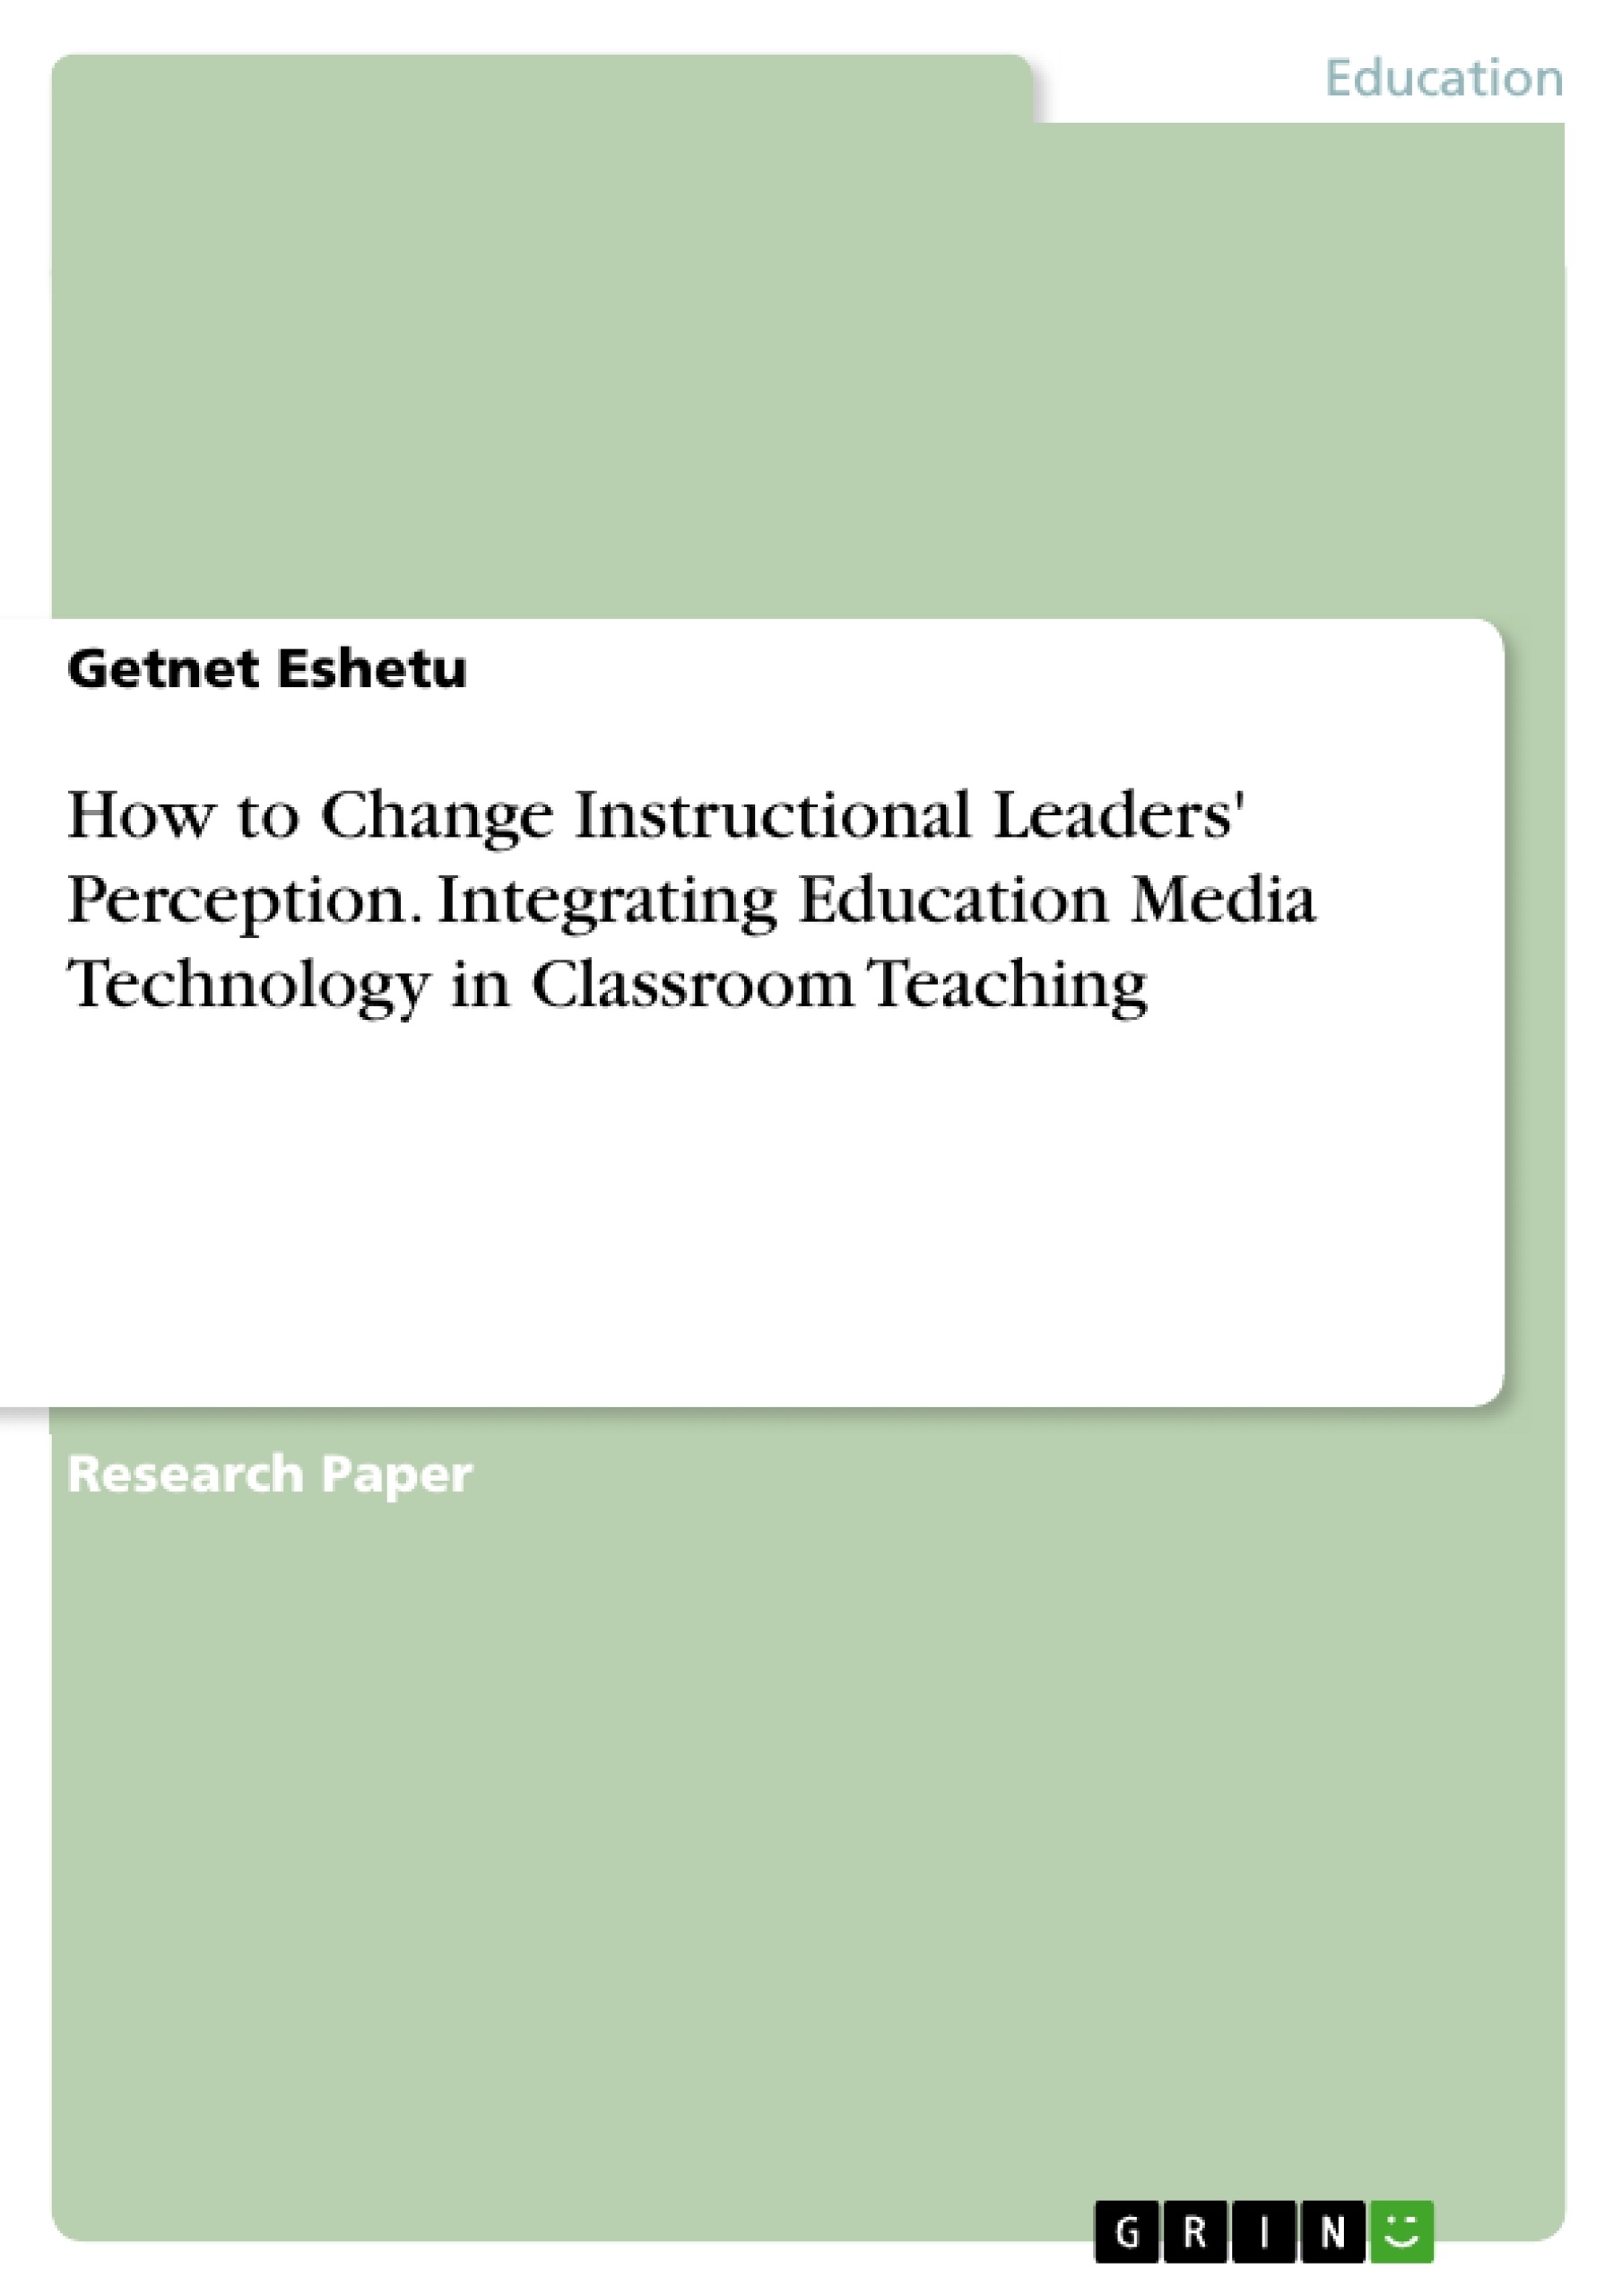 Título: How to Change Instructional Leaders' Perception. Integrating Education Media Technology in Classroom Teaching